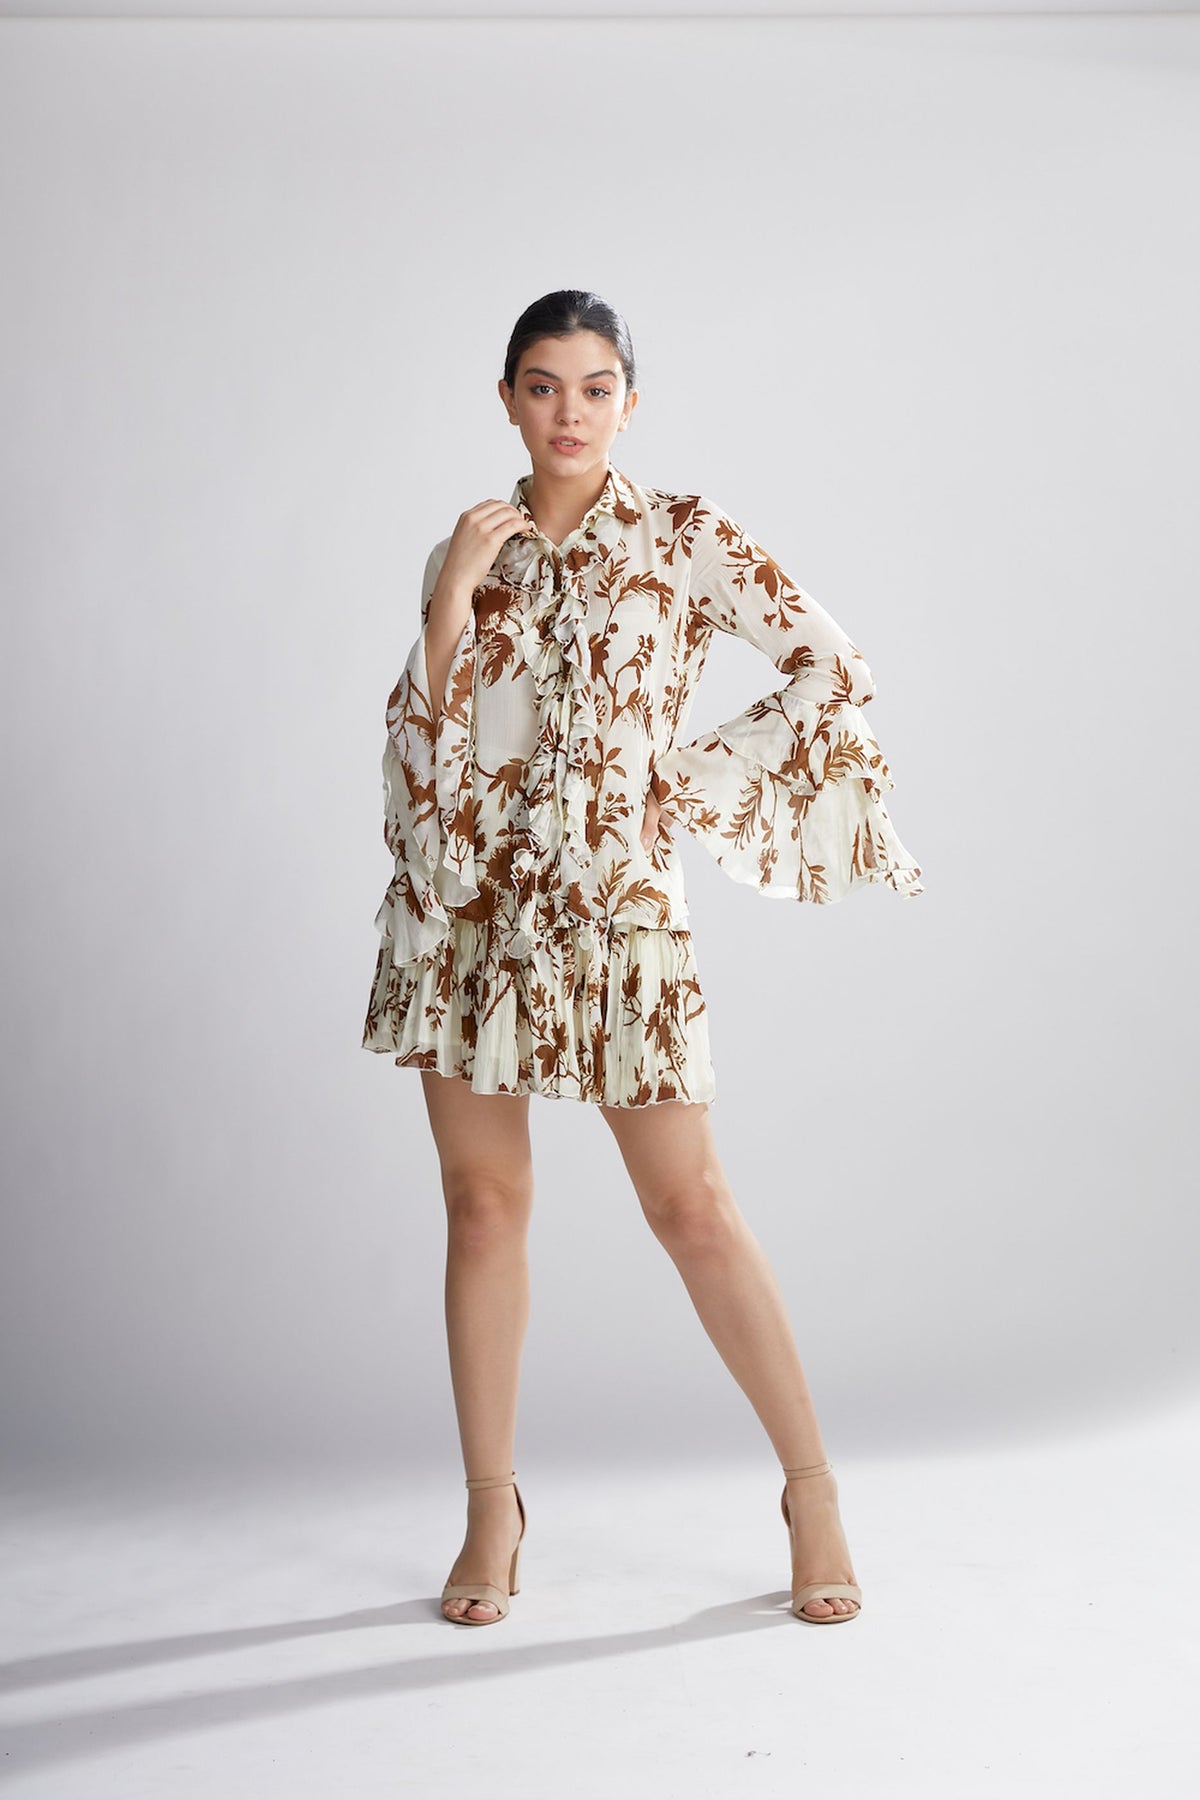 CREAM AND BROWN FLORAL FRILL SKIRT